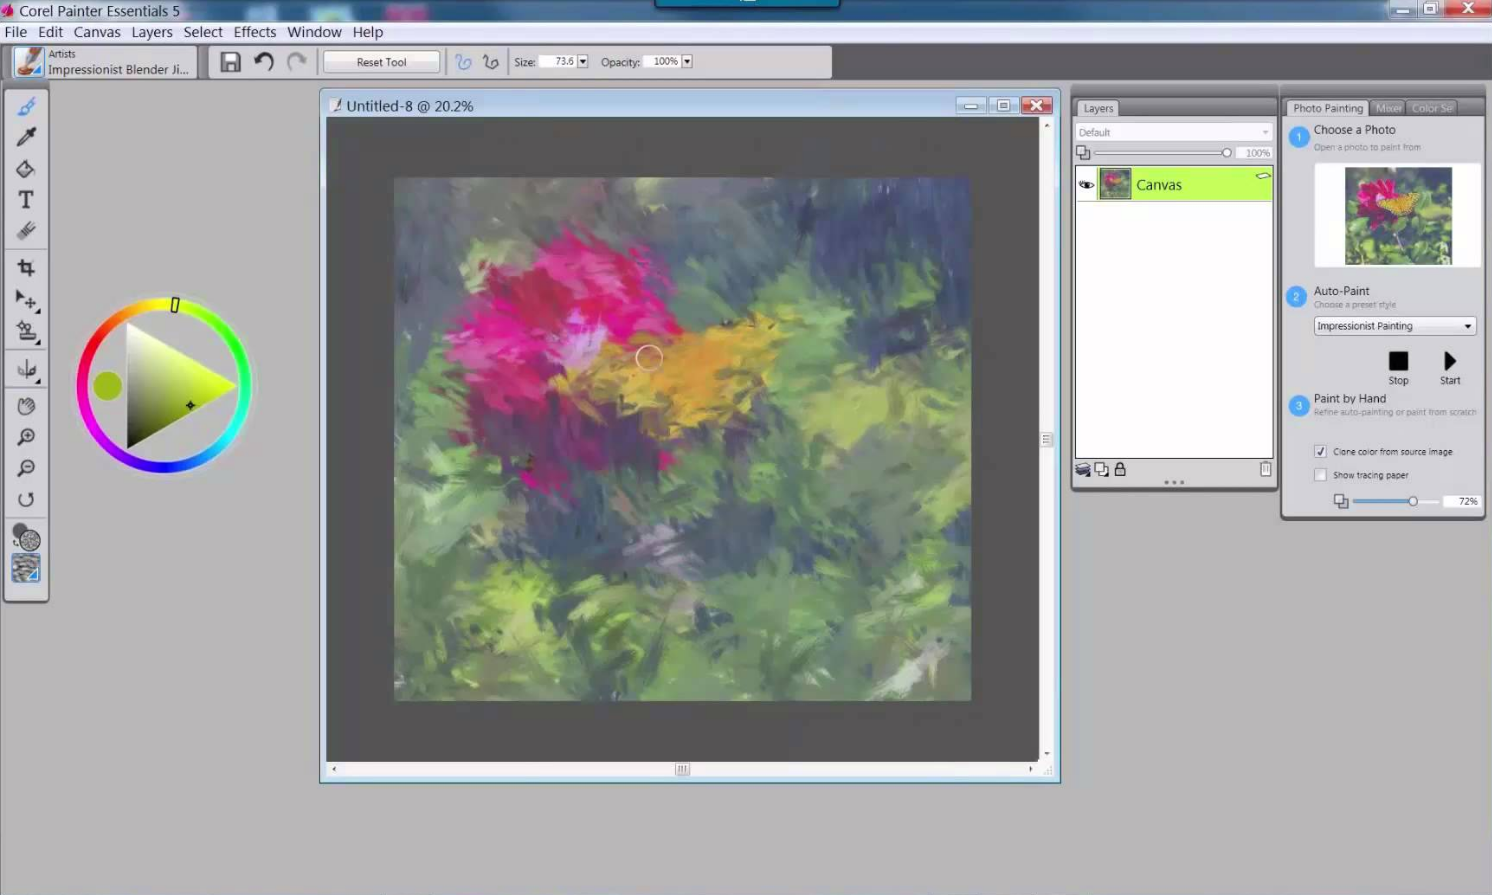 what is the best size canvas size in corel painter essentials 5